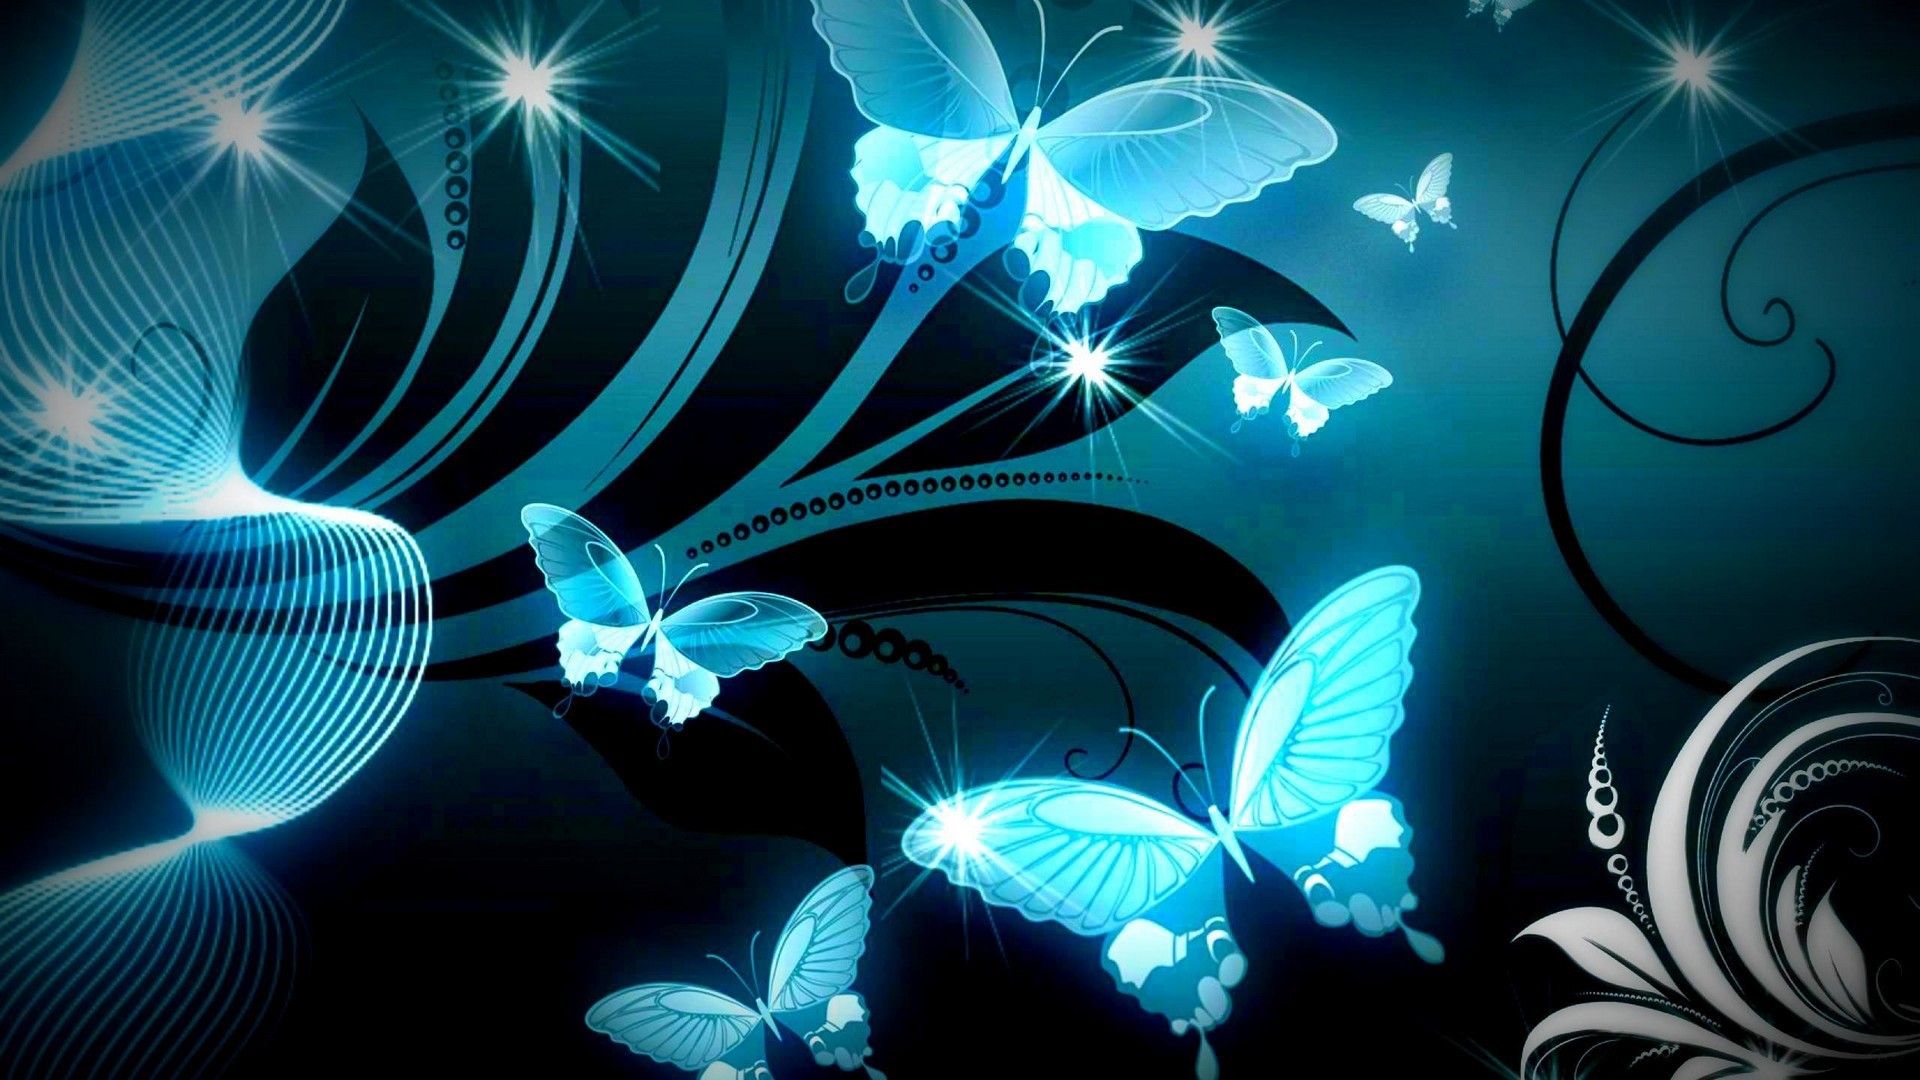 HD Butterfly Design Backgrounds 1920x1080